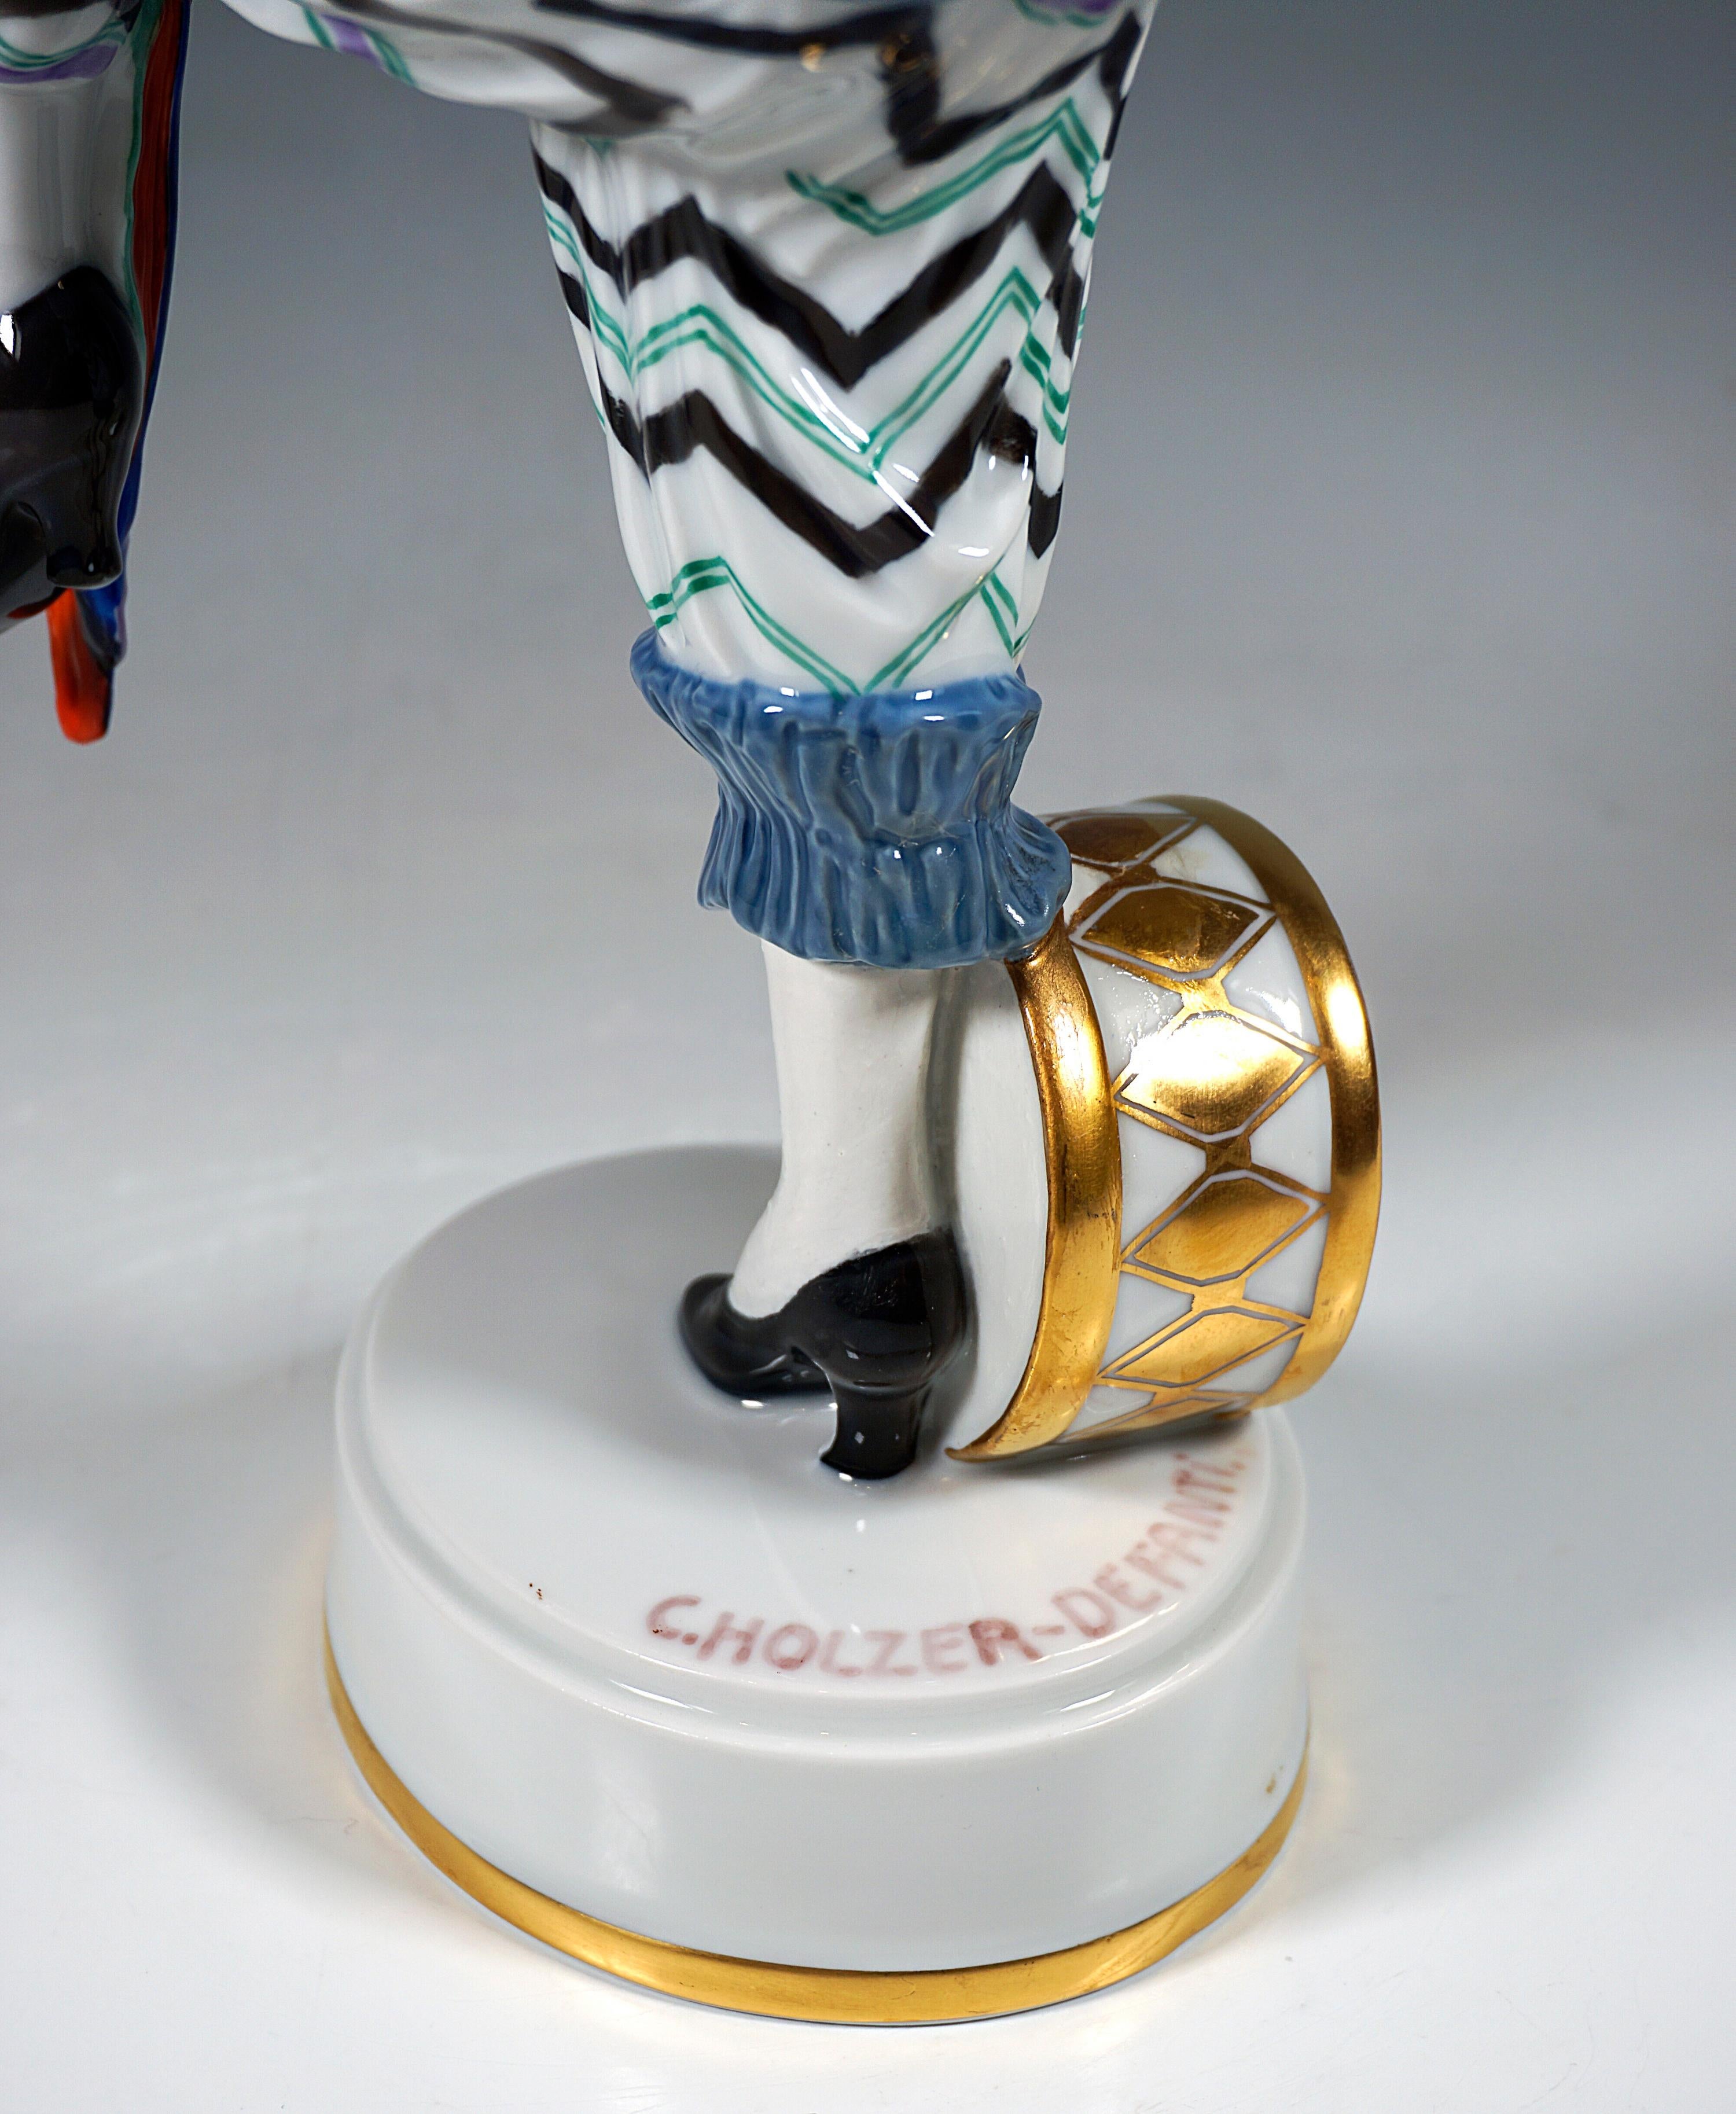 Art Déco Porcelain Figurine 'Merry March', C. Holzer-Defanti, Rosenthal Germany In Good Condition For Sale In Vienna, AT